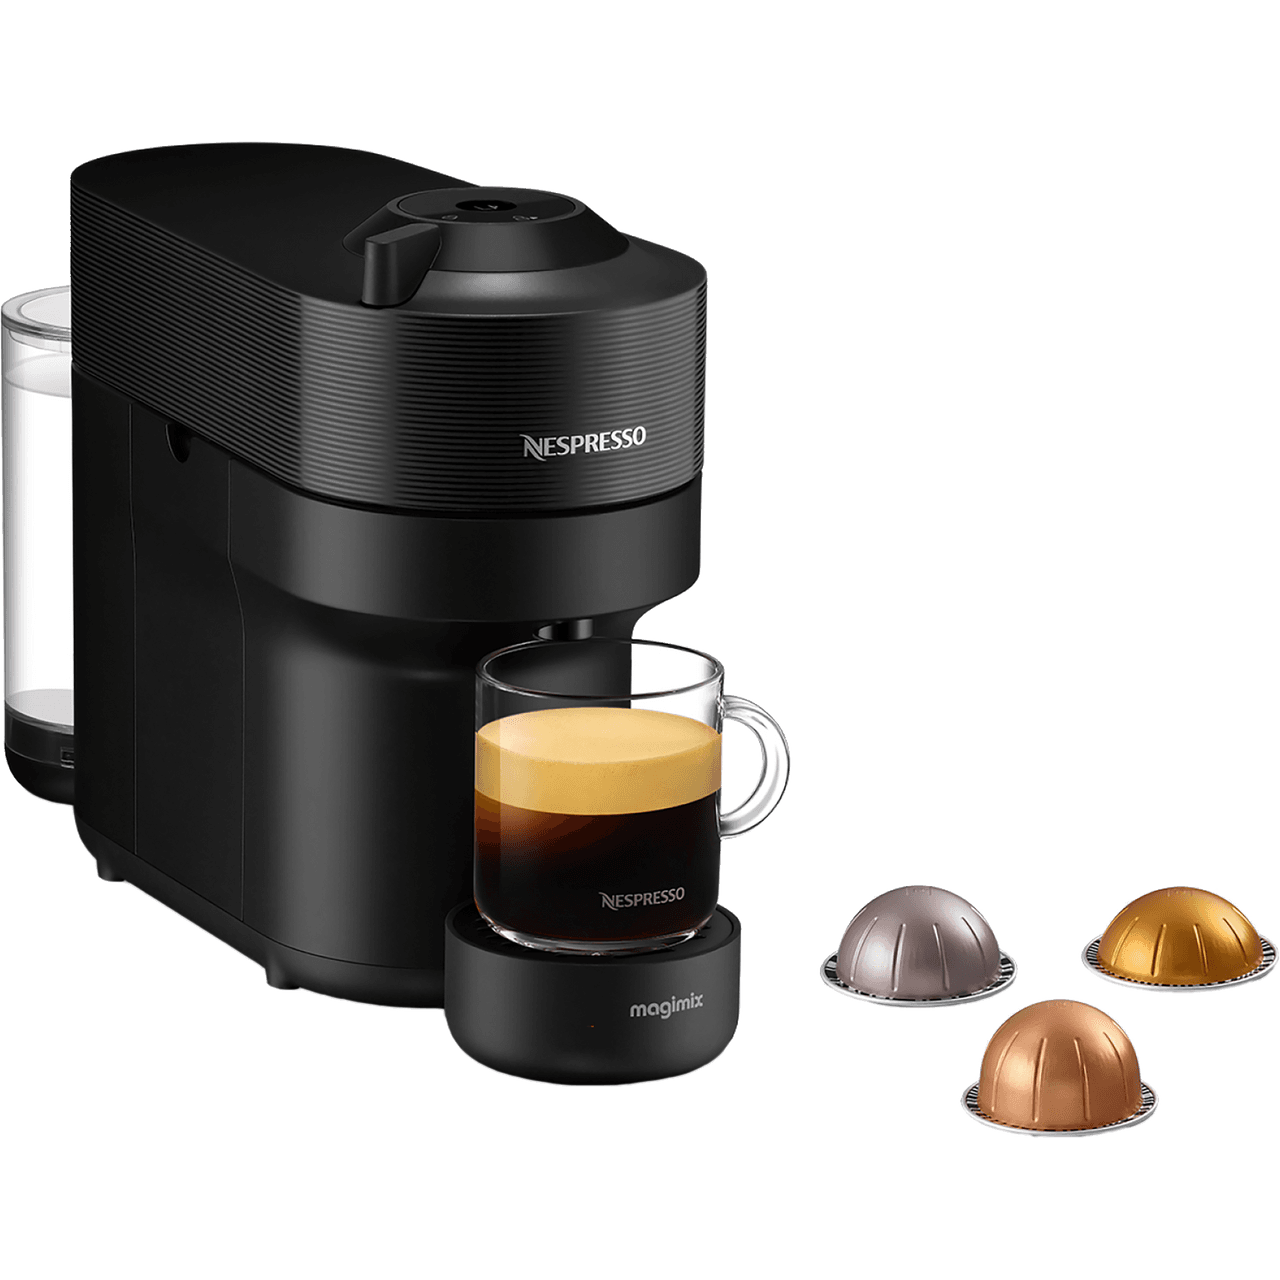 https://assets.products-live.ao.com/Images/1be3ded9-d635-4dd2-b487-028c2aa9eff8/1280x1280/11729_BK_nespresso_coffeemachine_01.png